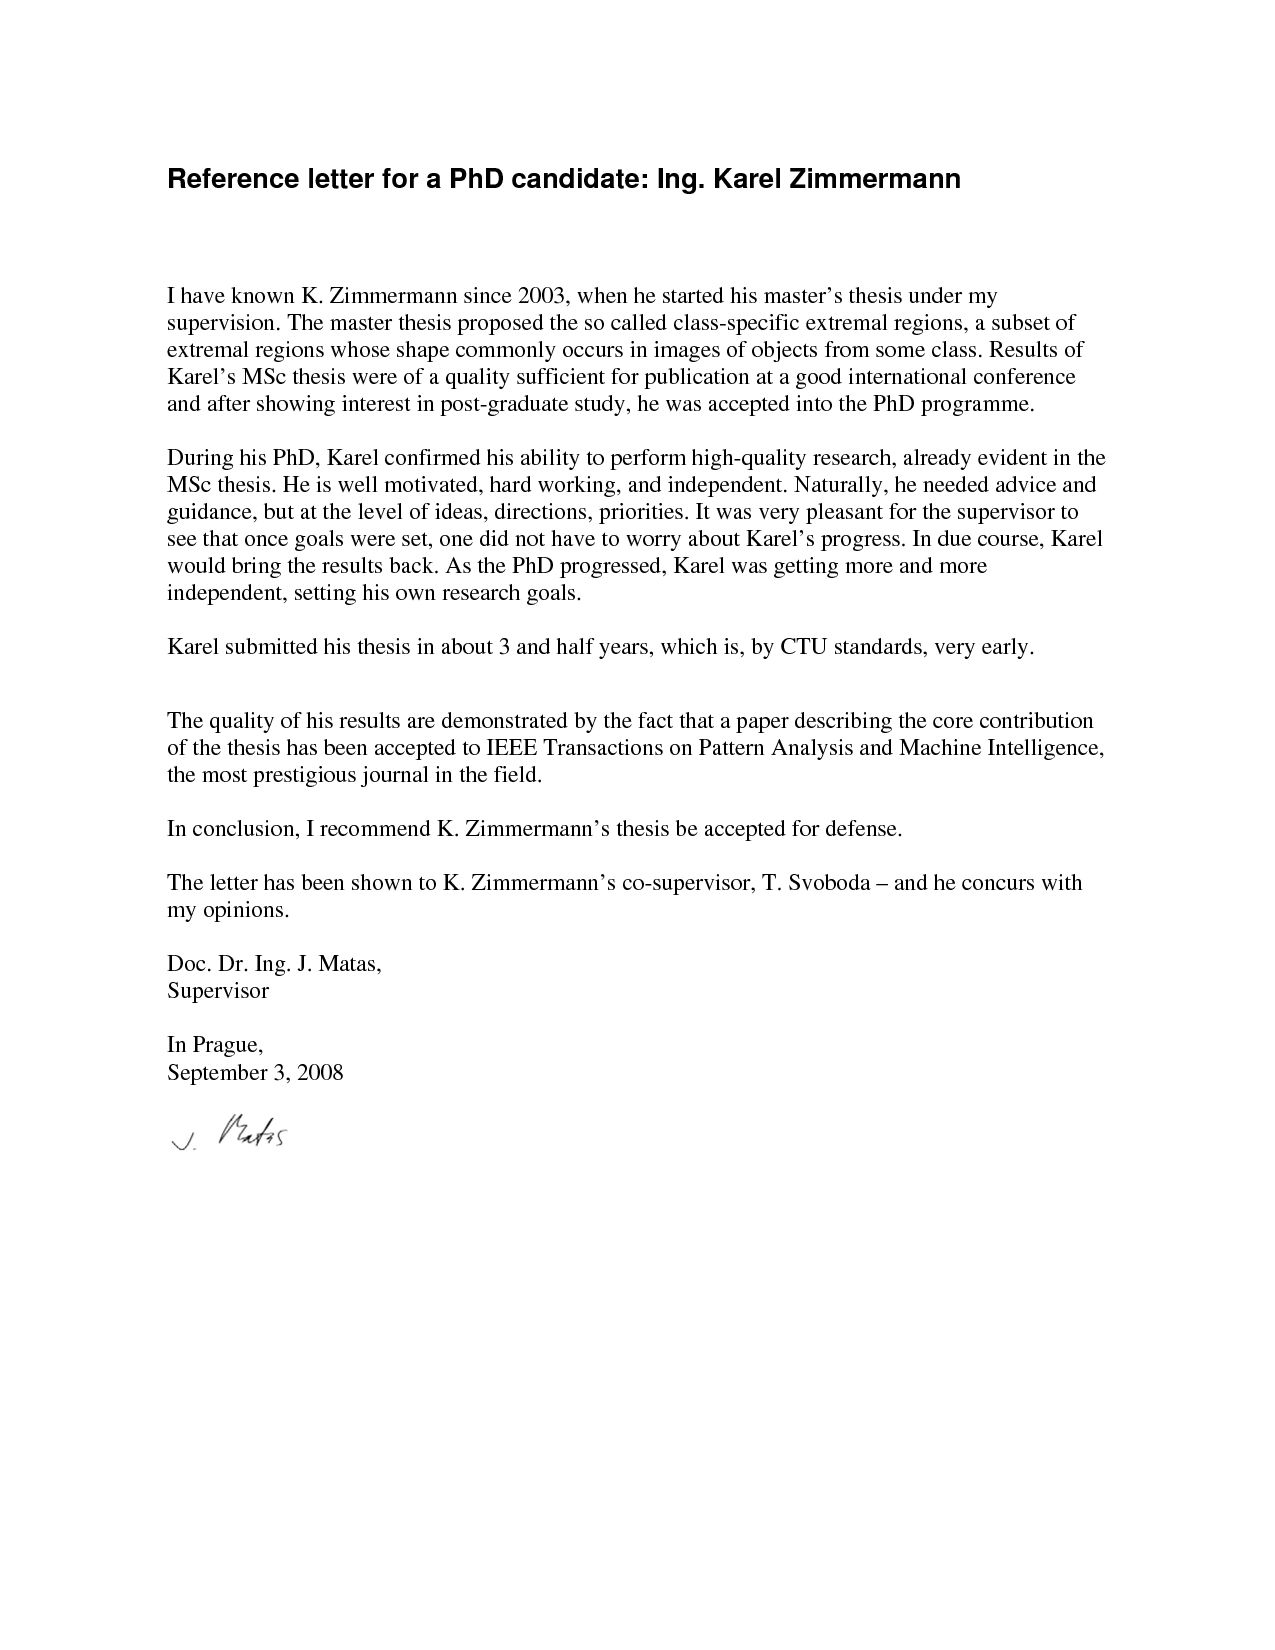 Recommendation Letter For Phd Admission Debandje within measurements 1275 X 1650